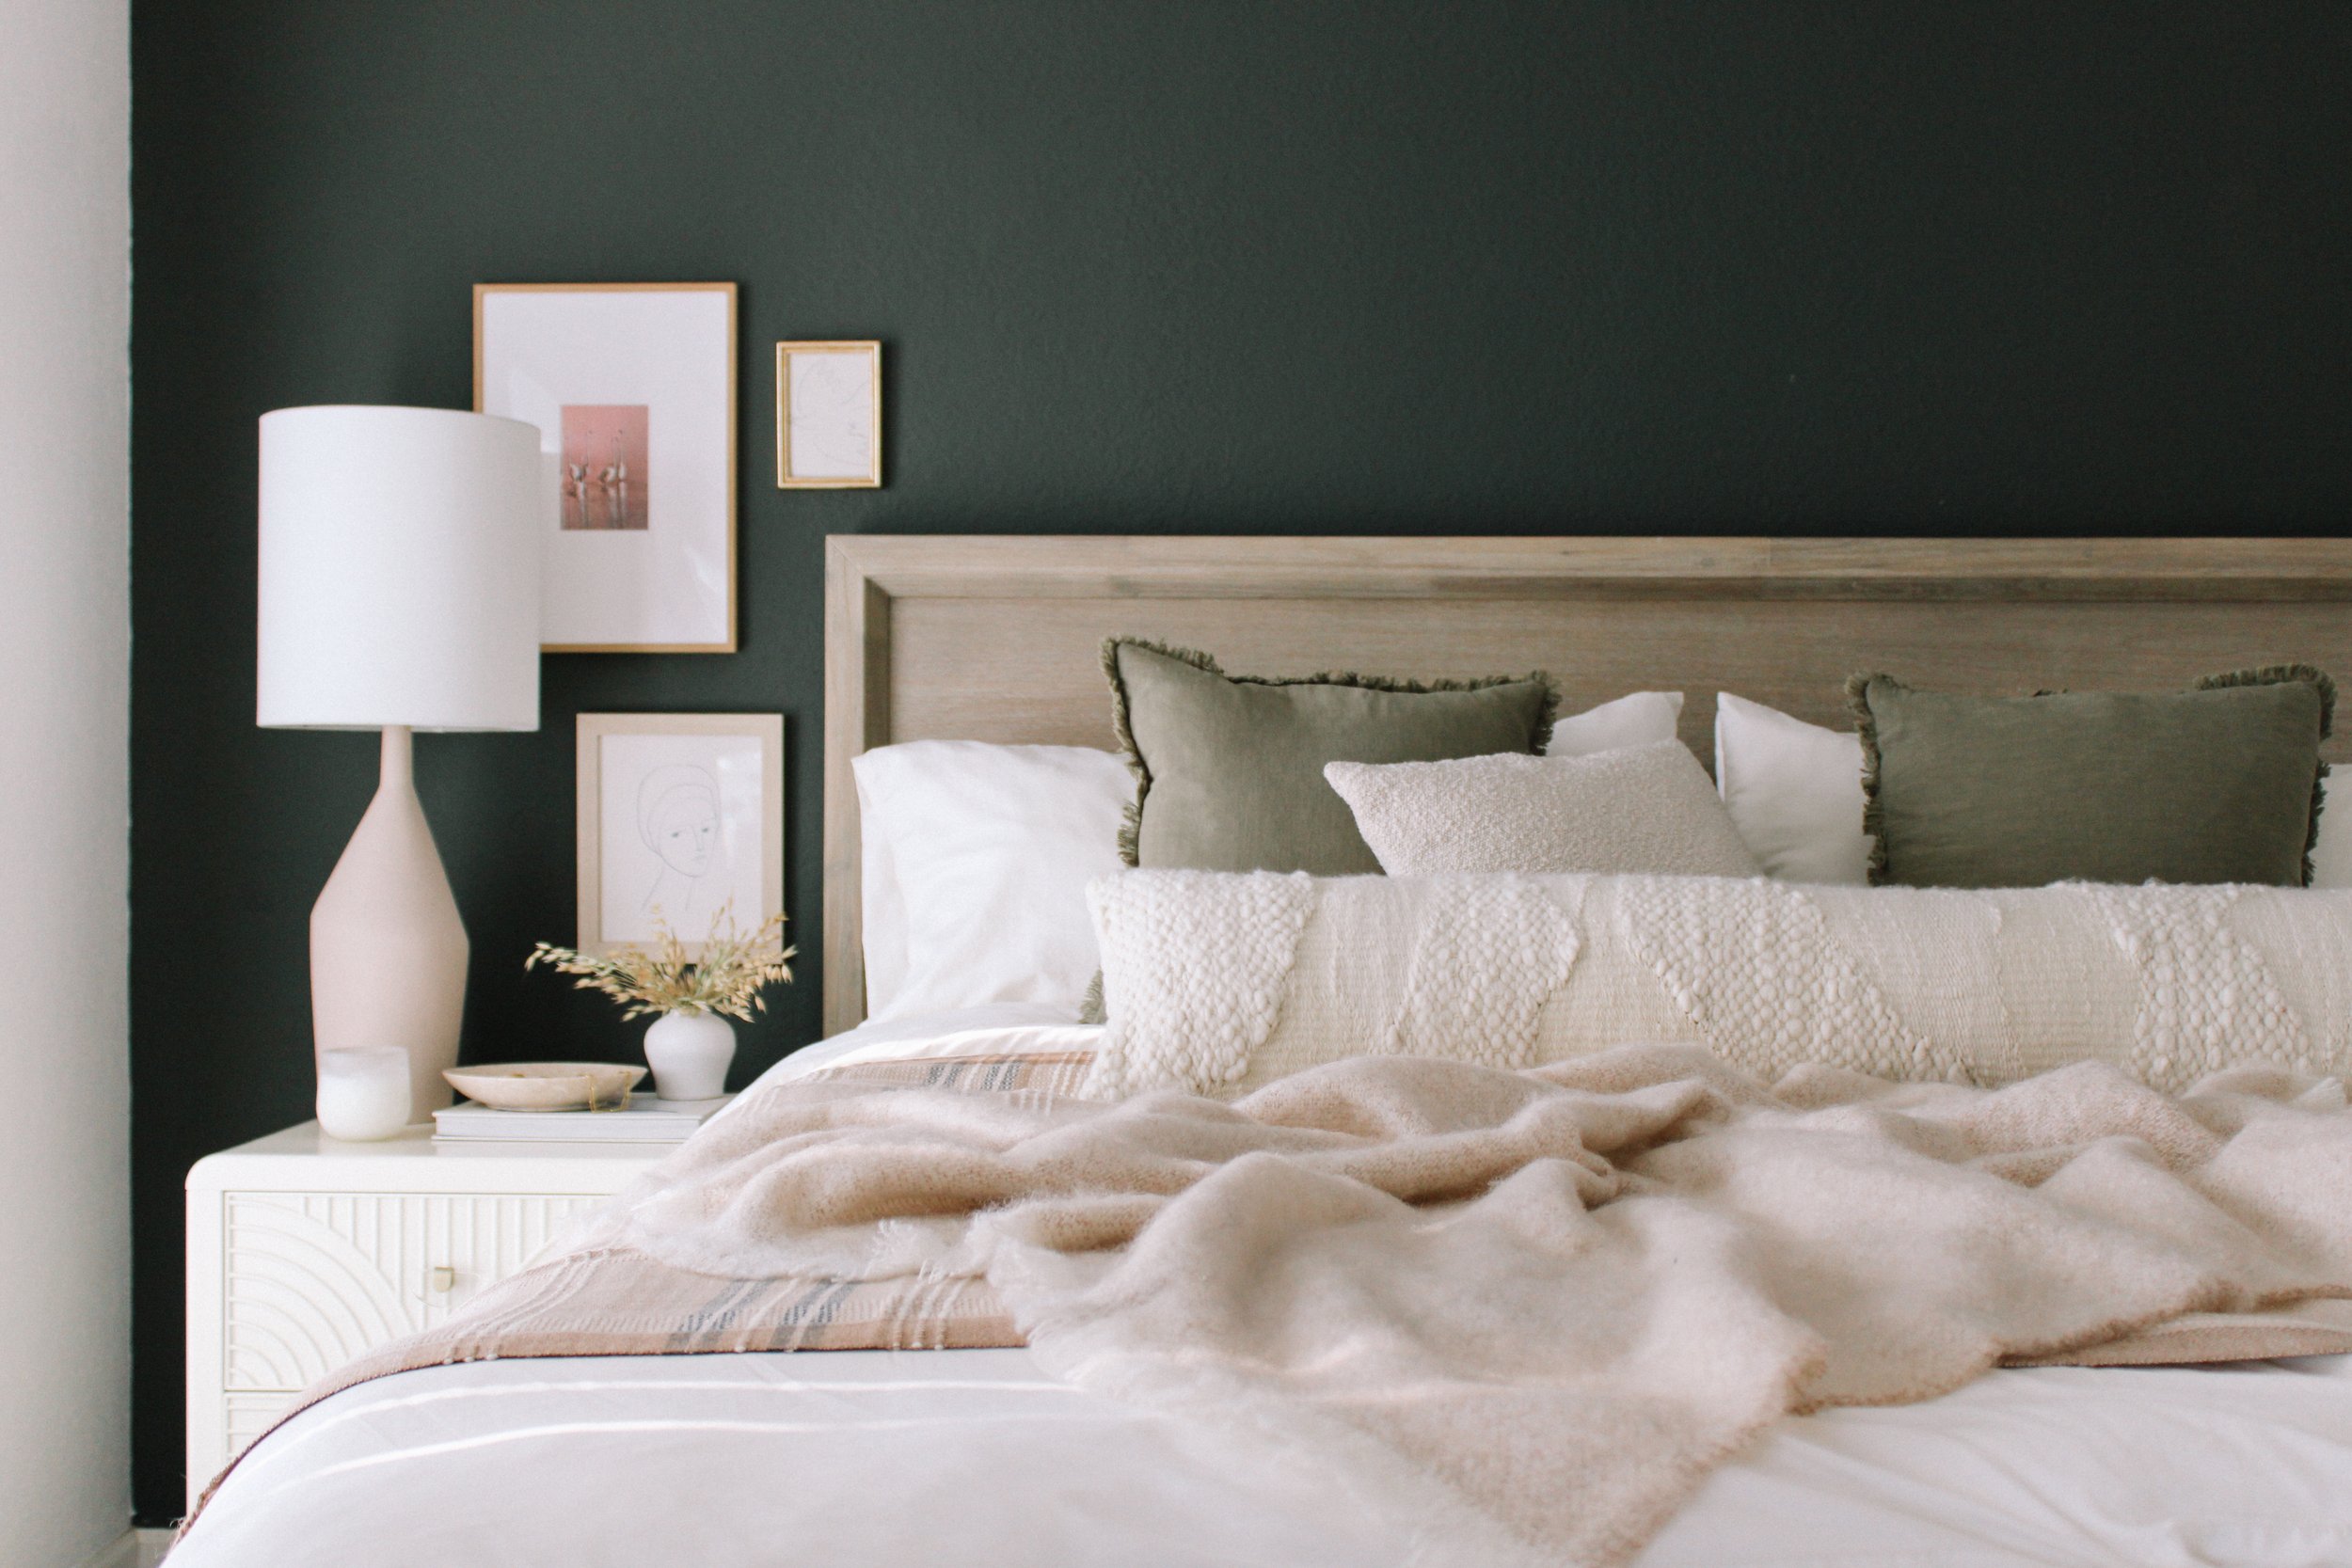 10 Ideas for How to Style Your Bed Pillows